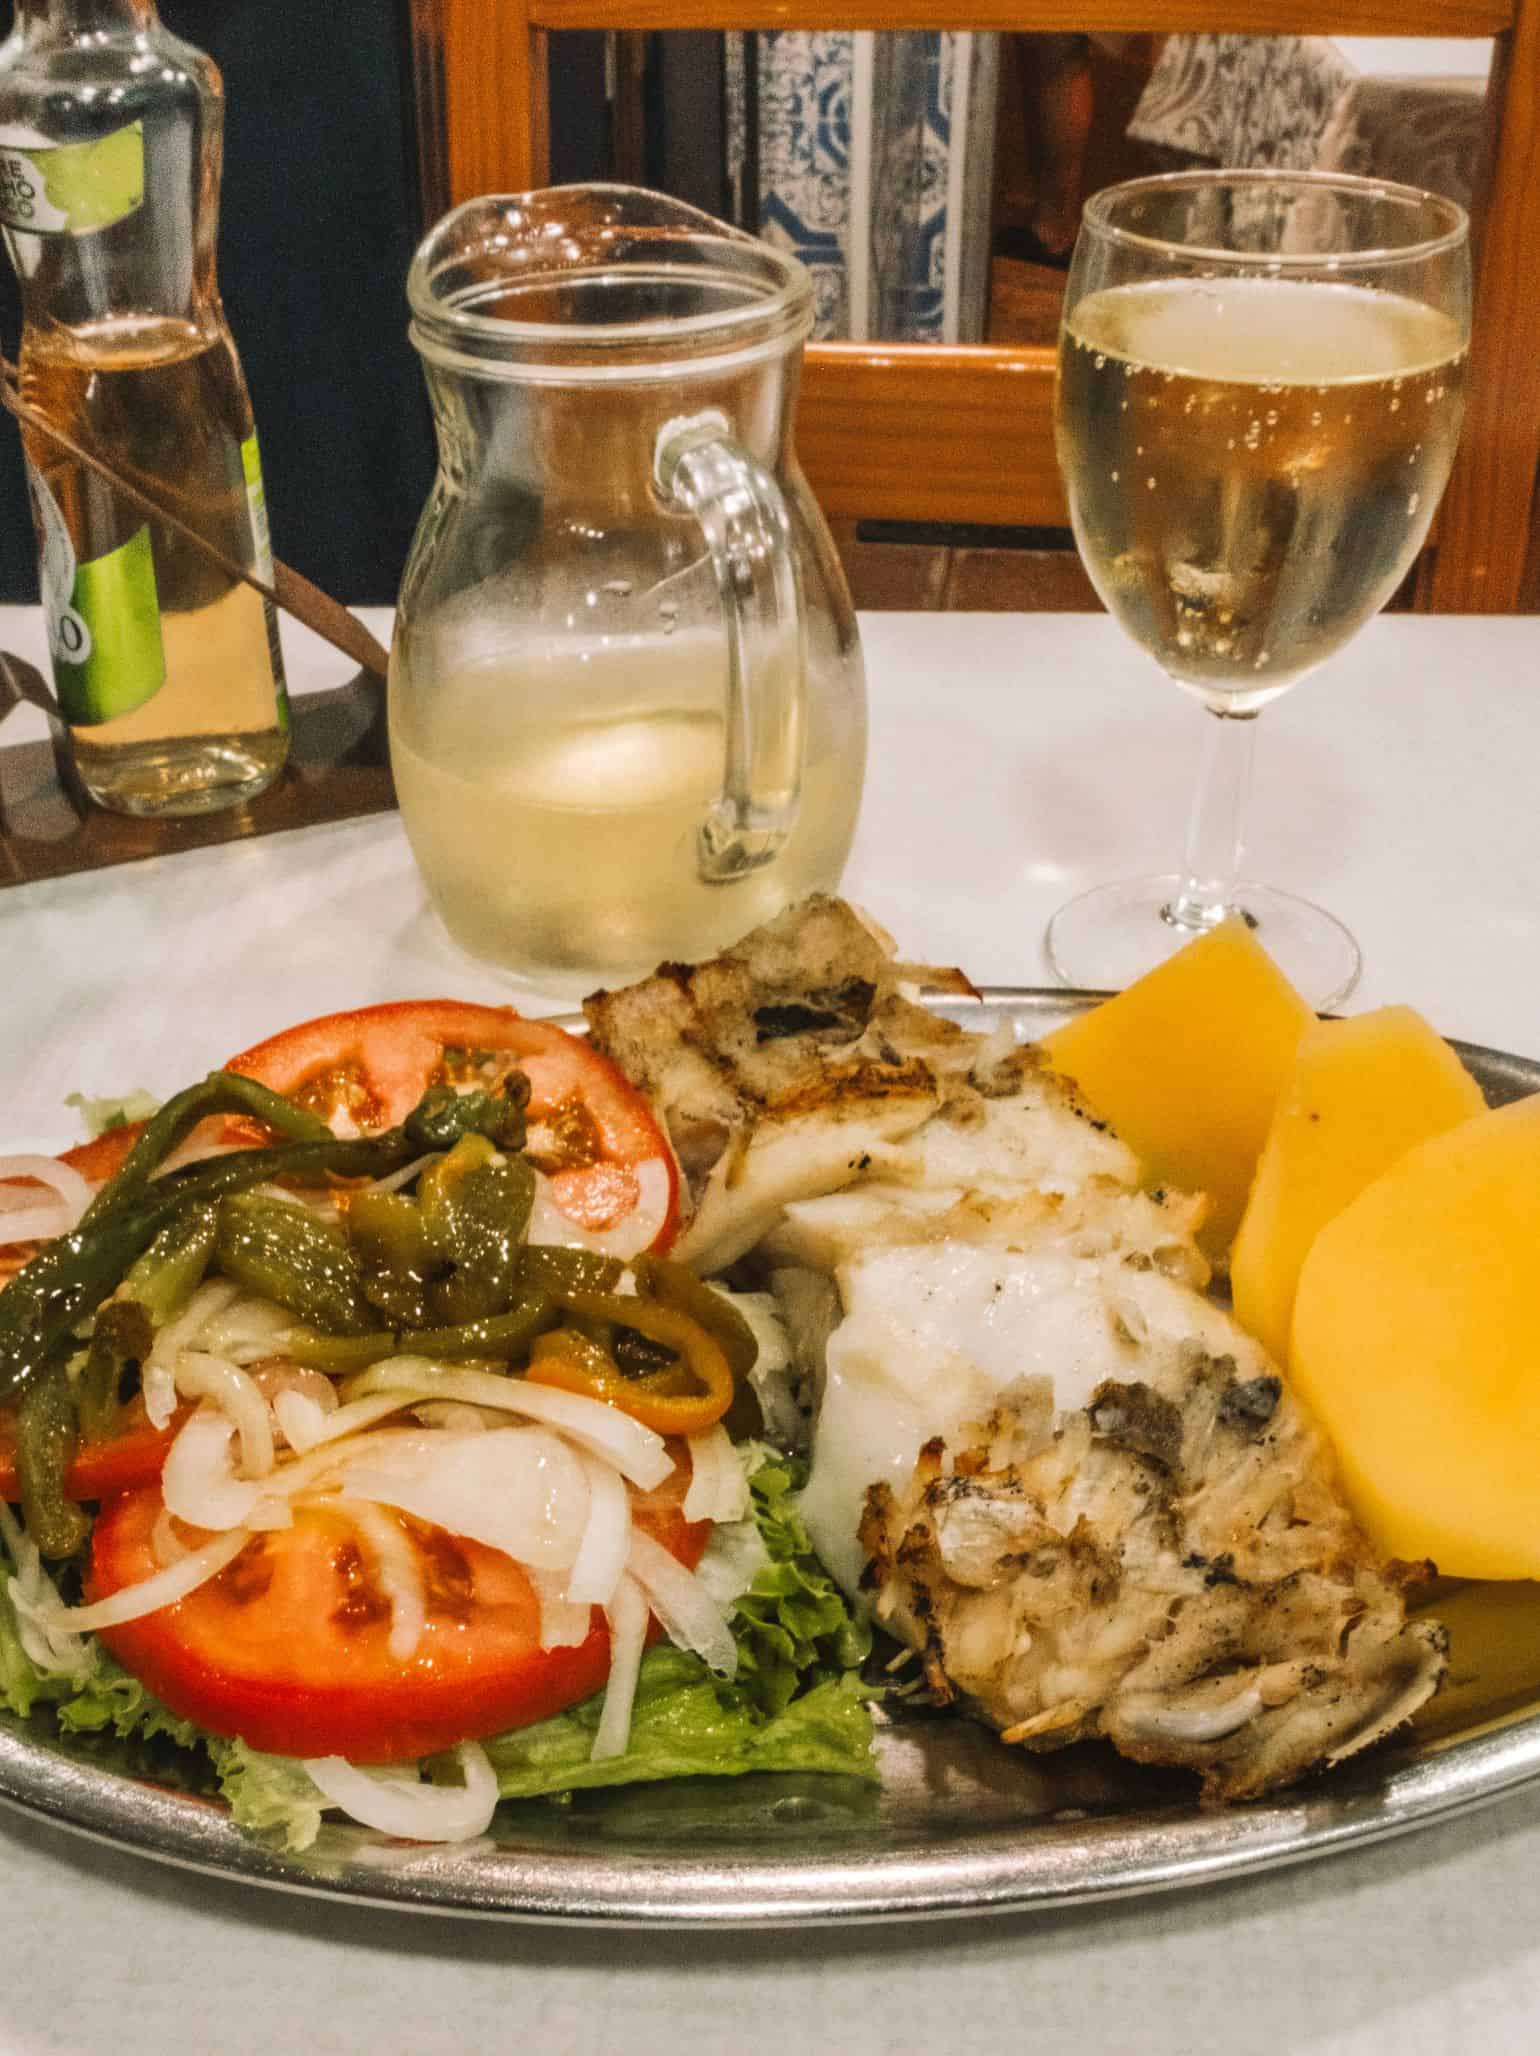 Oven-baked cod with boiled potatoes, a side salad, and a carafe of vinho verde from O Caldo Verde in Lisbon.